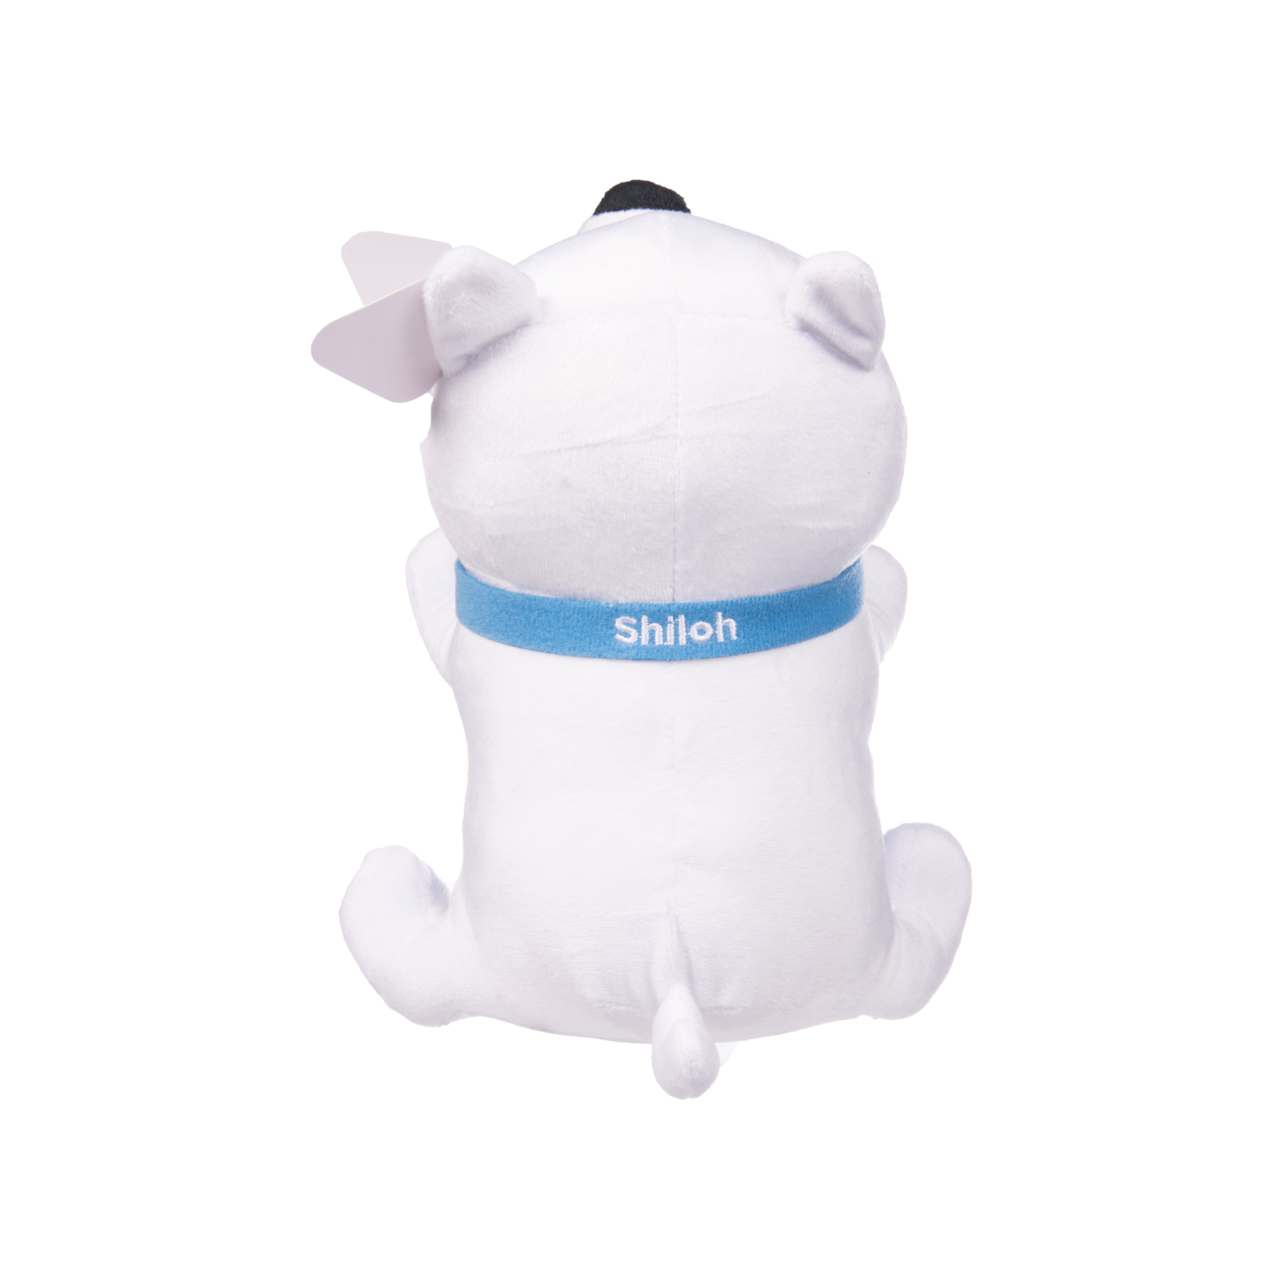 Limited Edition Shiloh Plushie